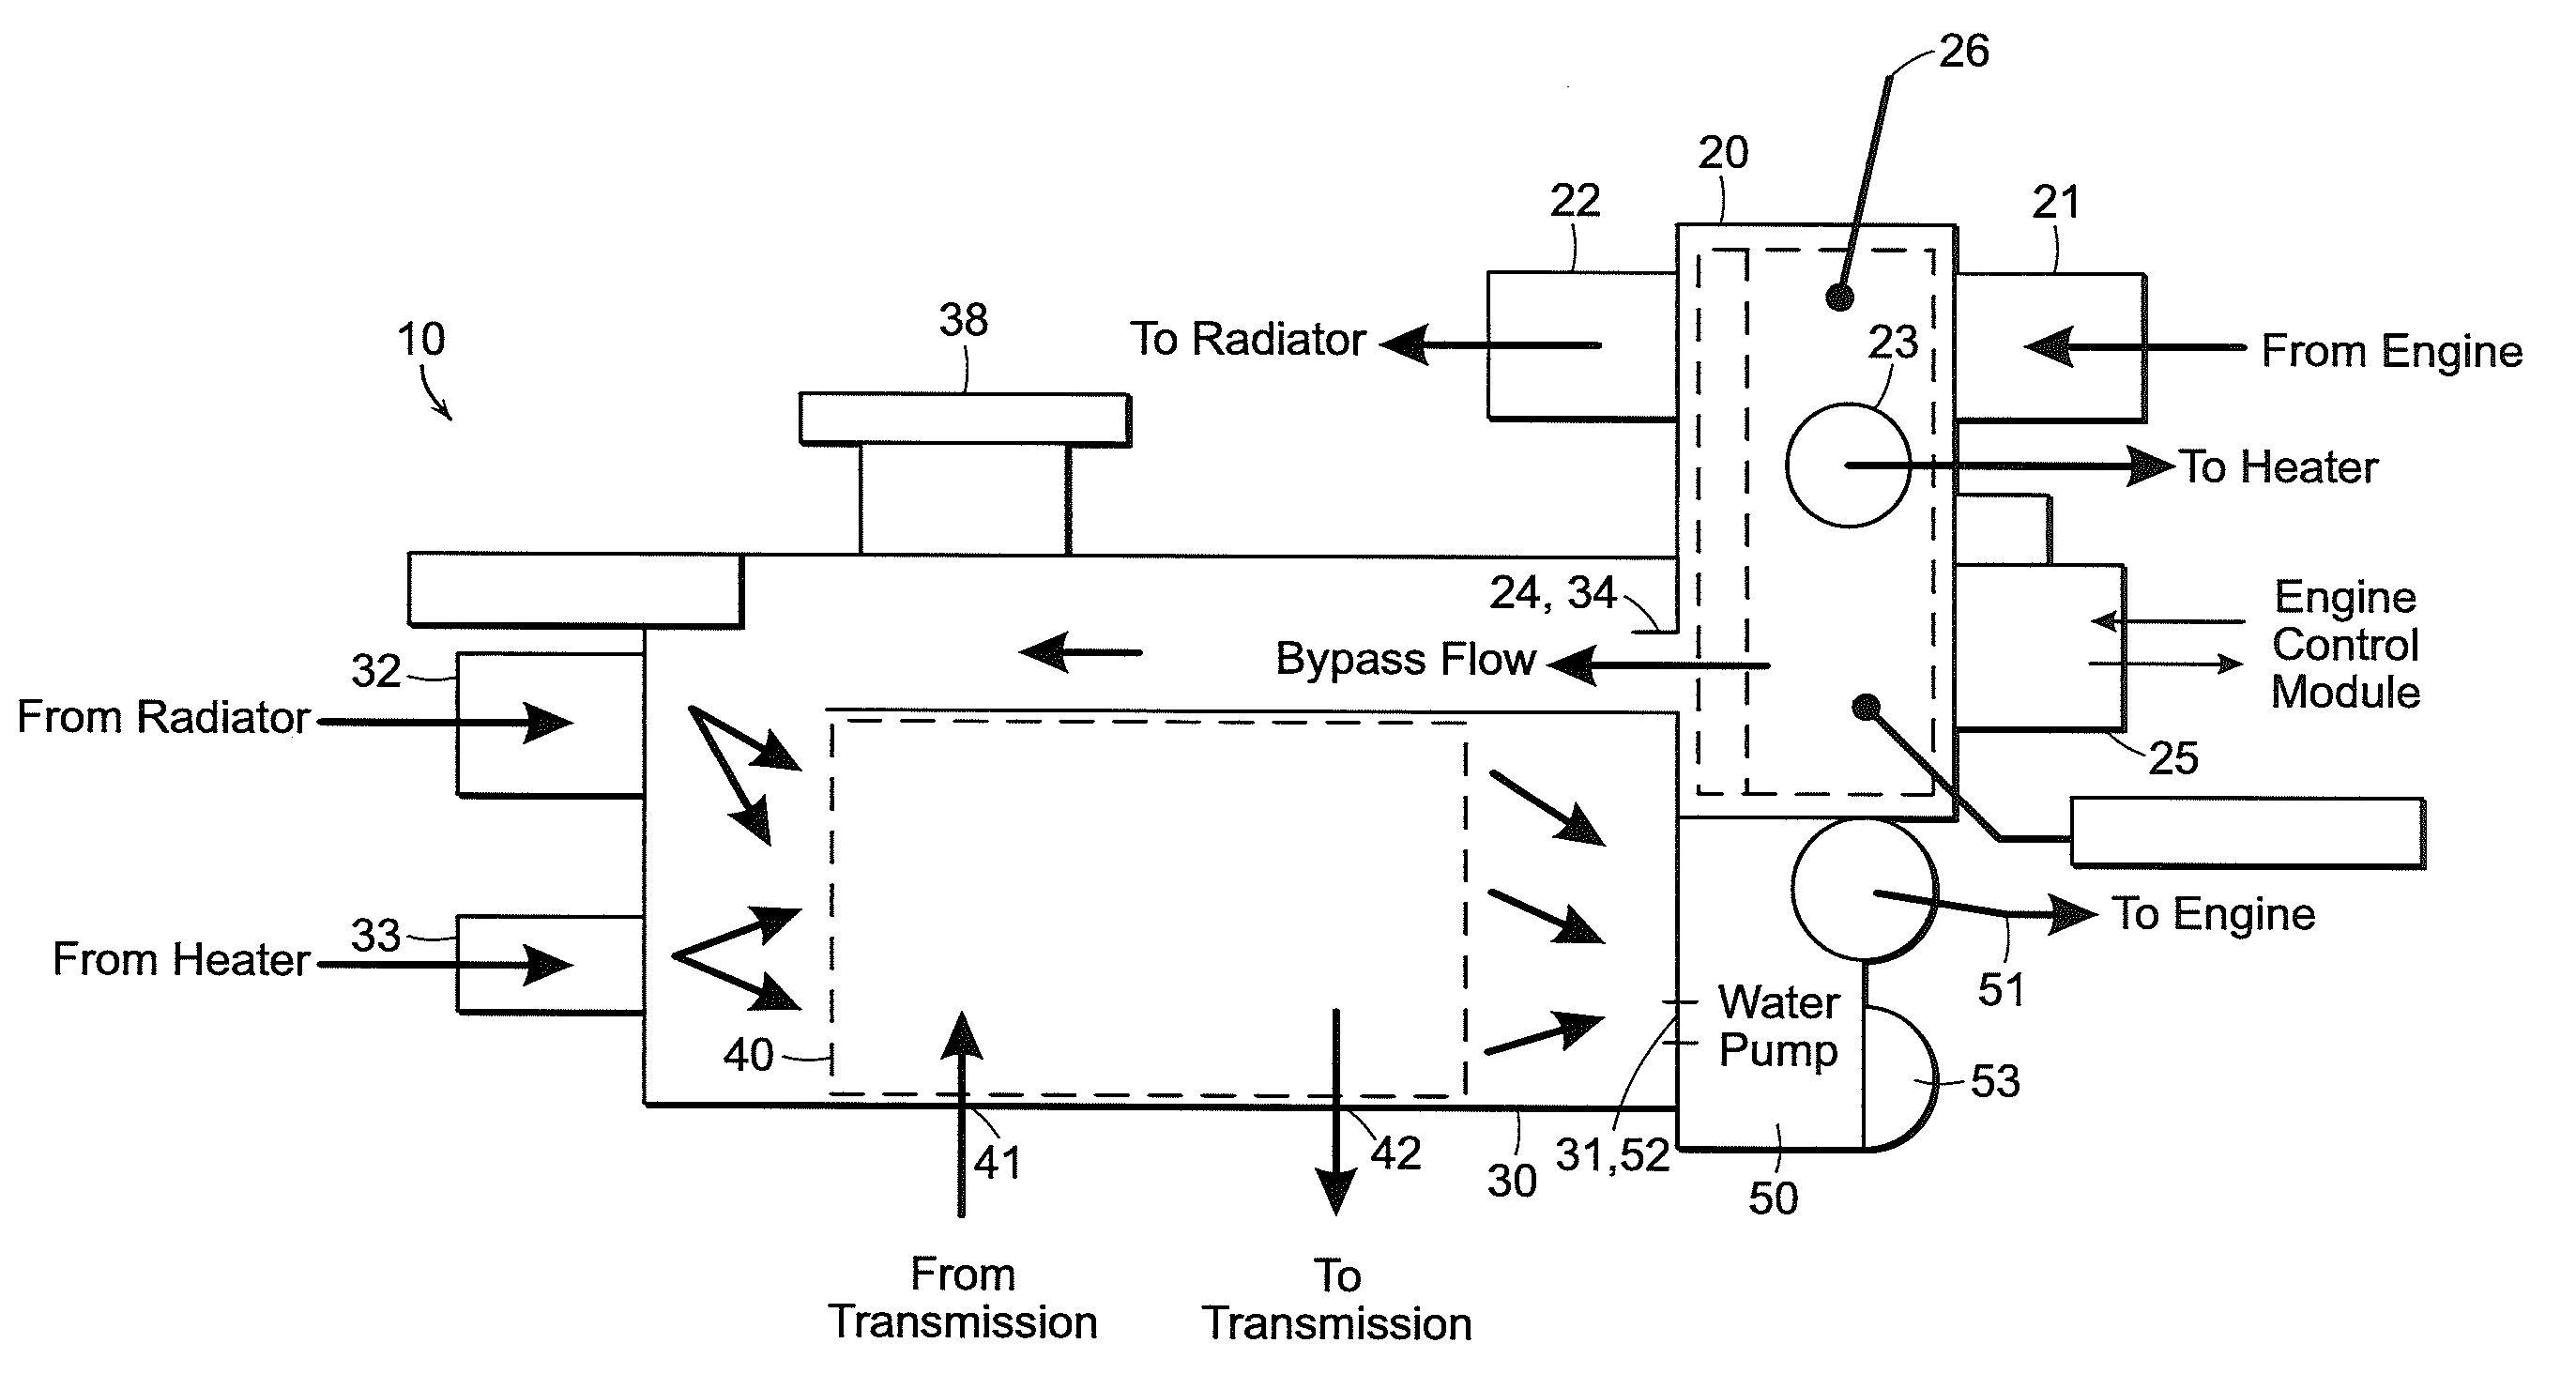 Integrated pump, coolant flow control and heat exchange device